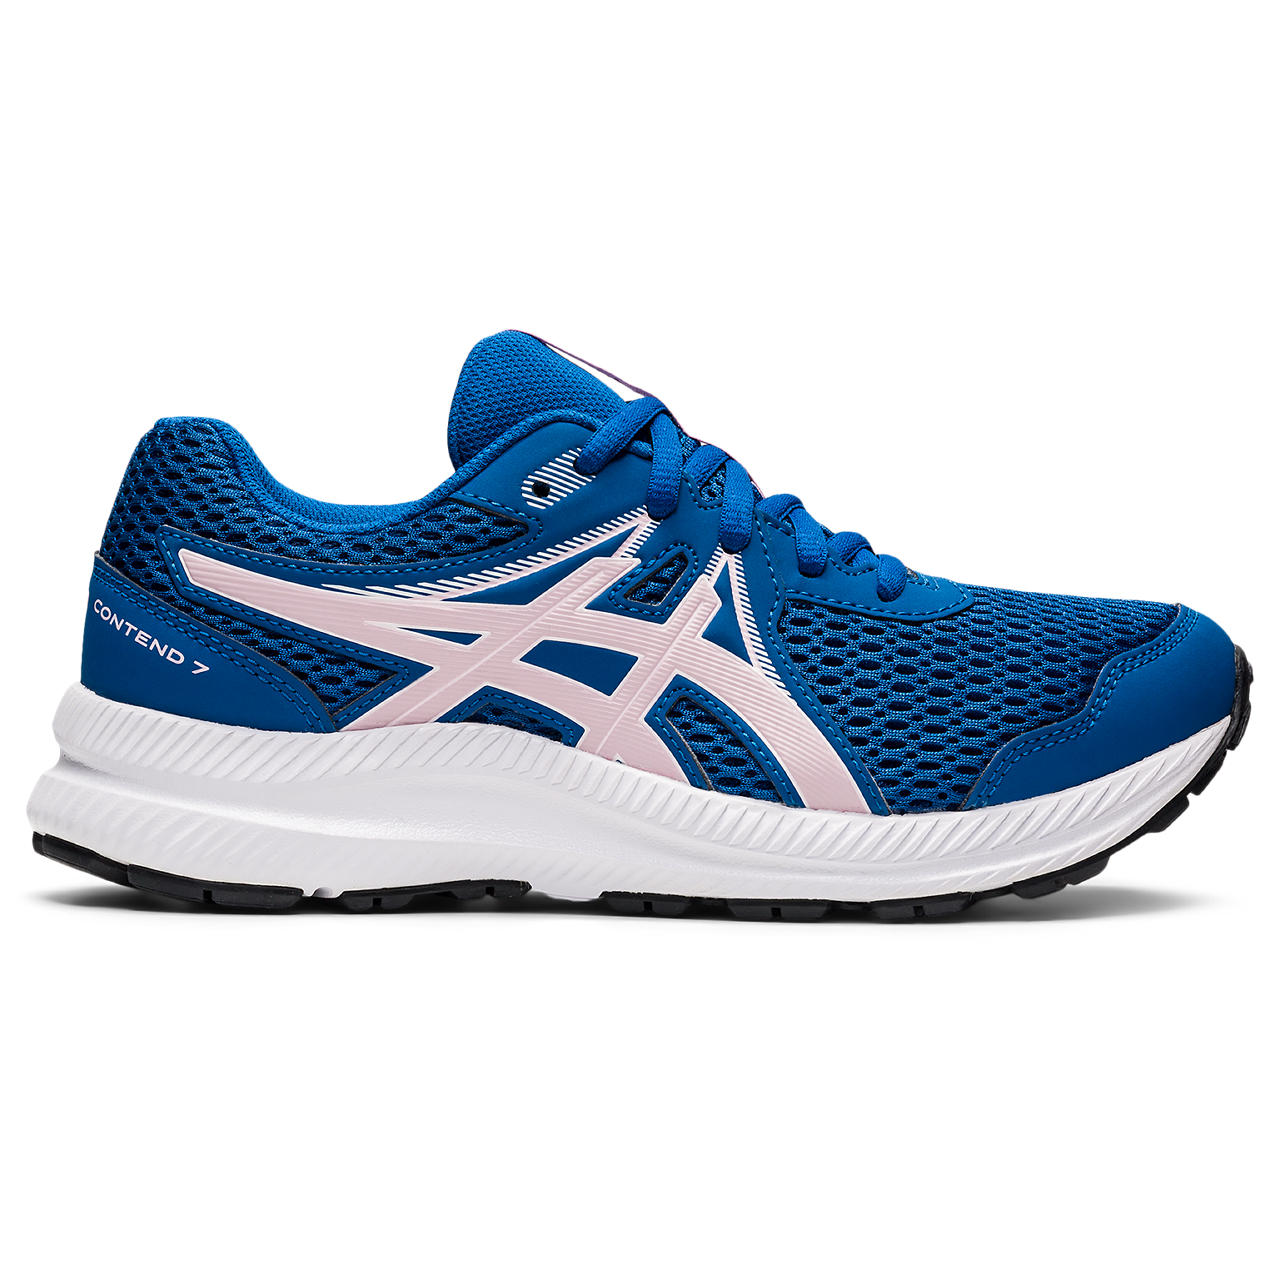 ASICS CONTEND 7 GS, LAKE DRIVE/BARELY ROSE, swatch